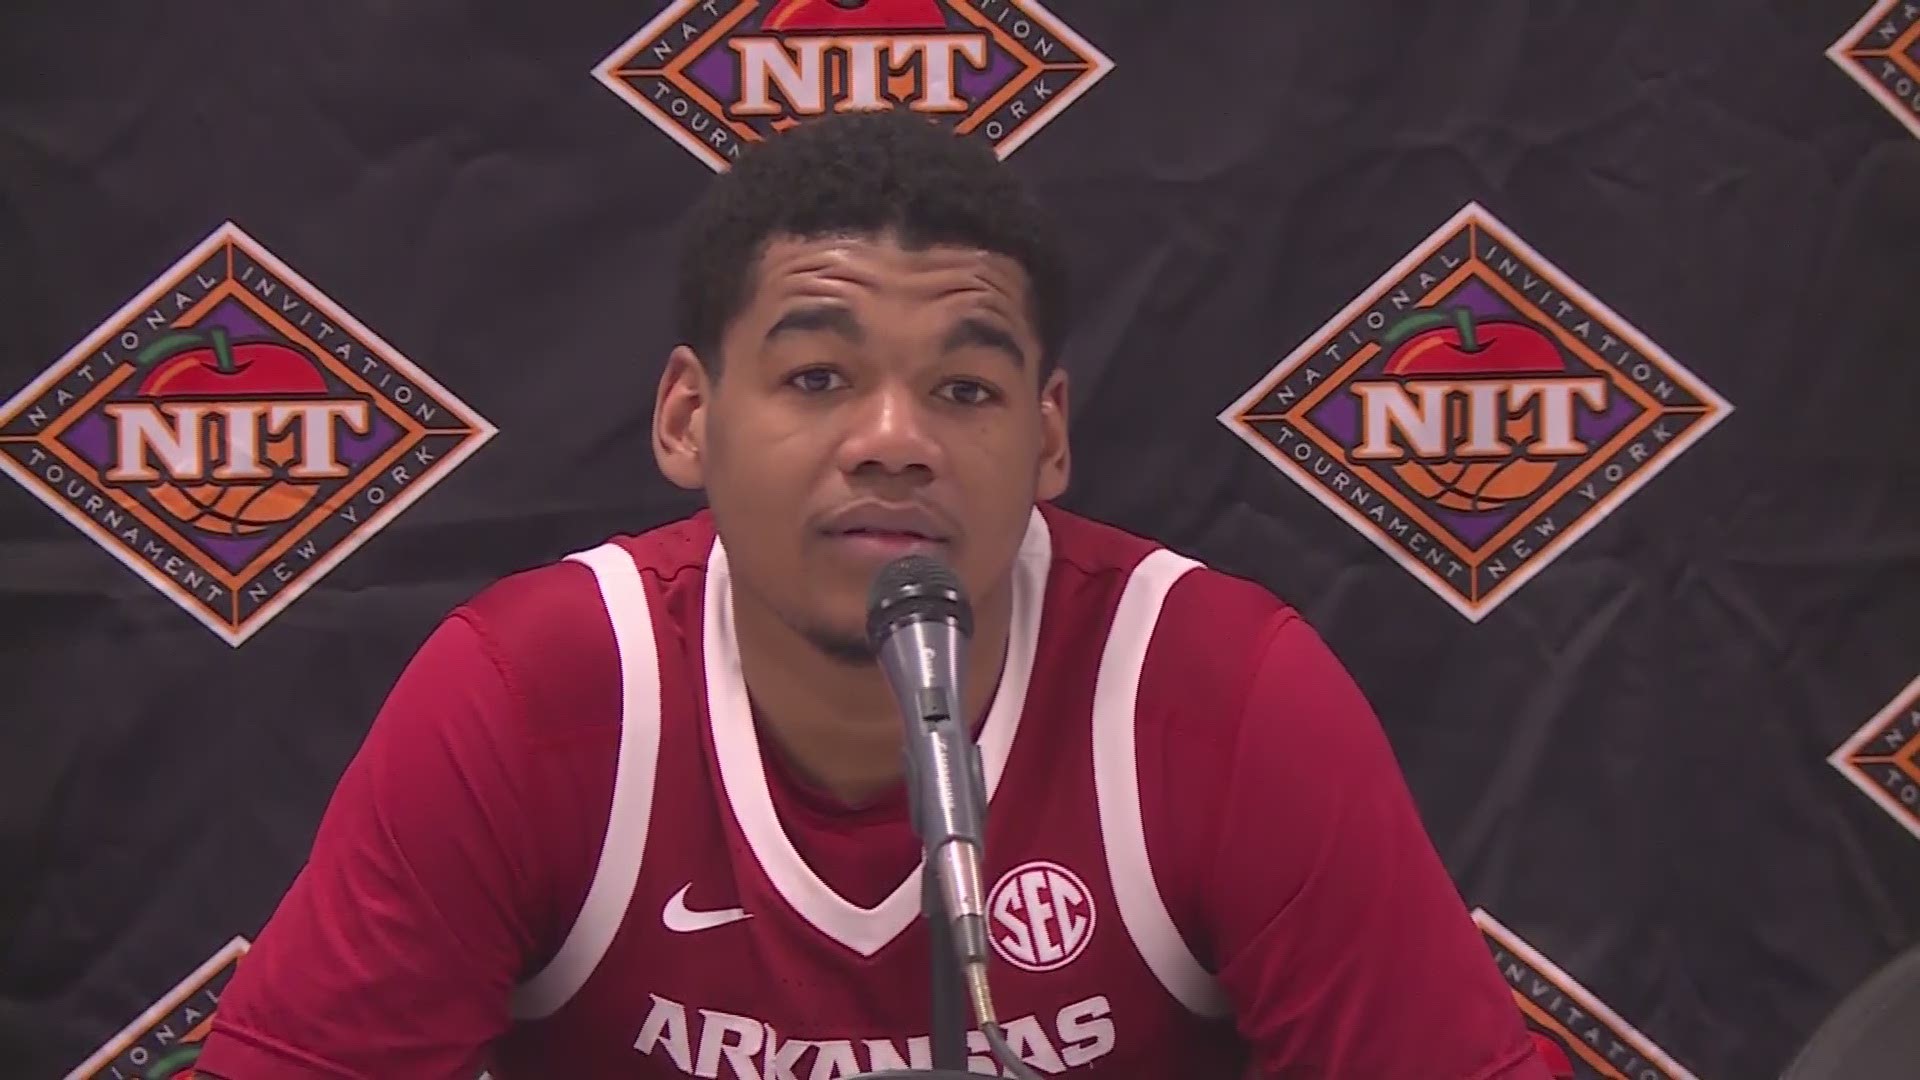 Mike Anderson recaps his team's 84-72 win over Providence in the NIT